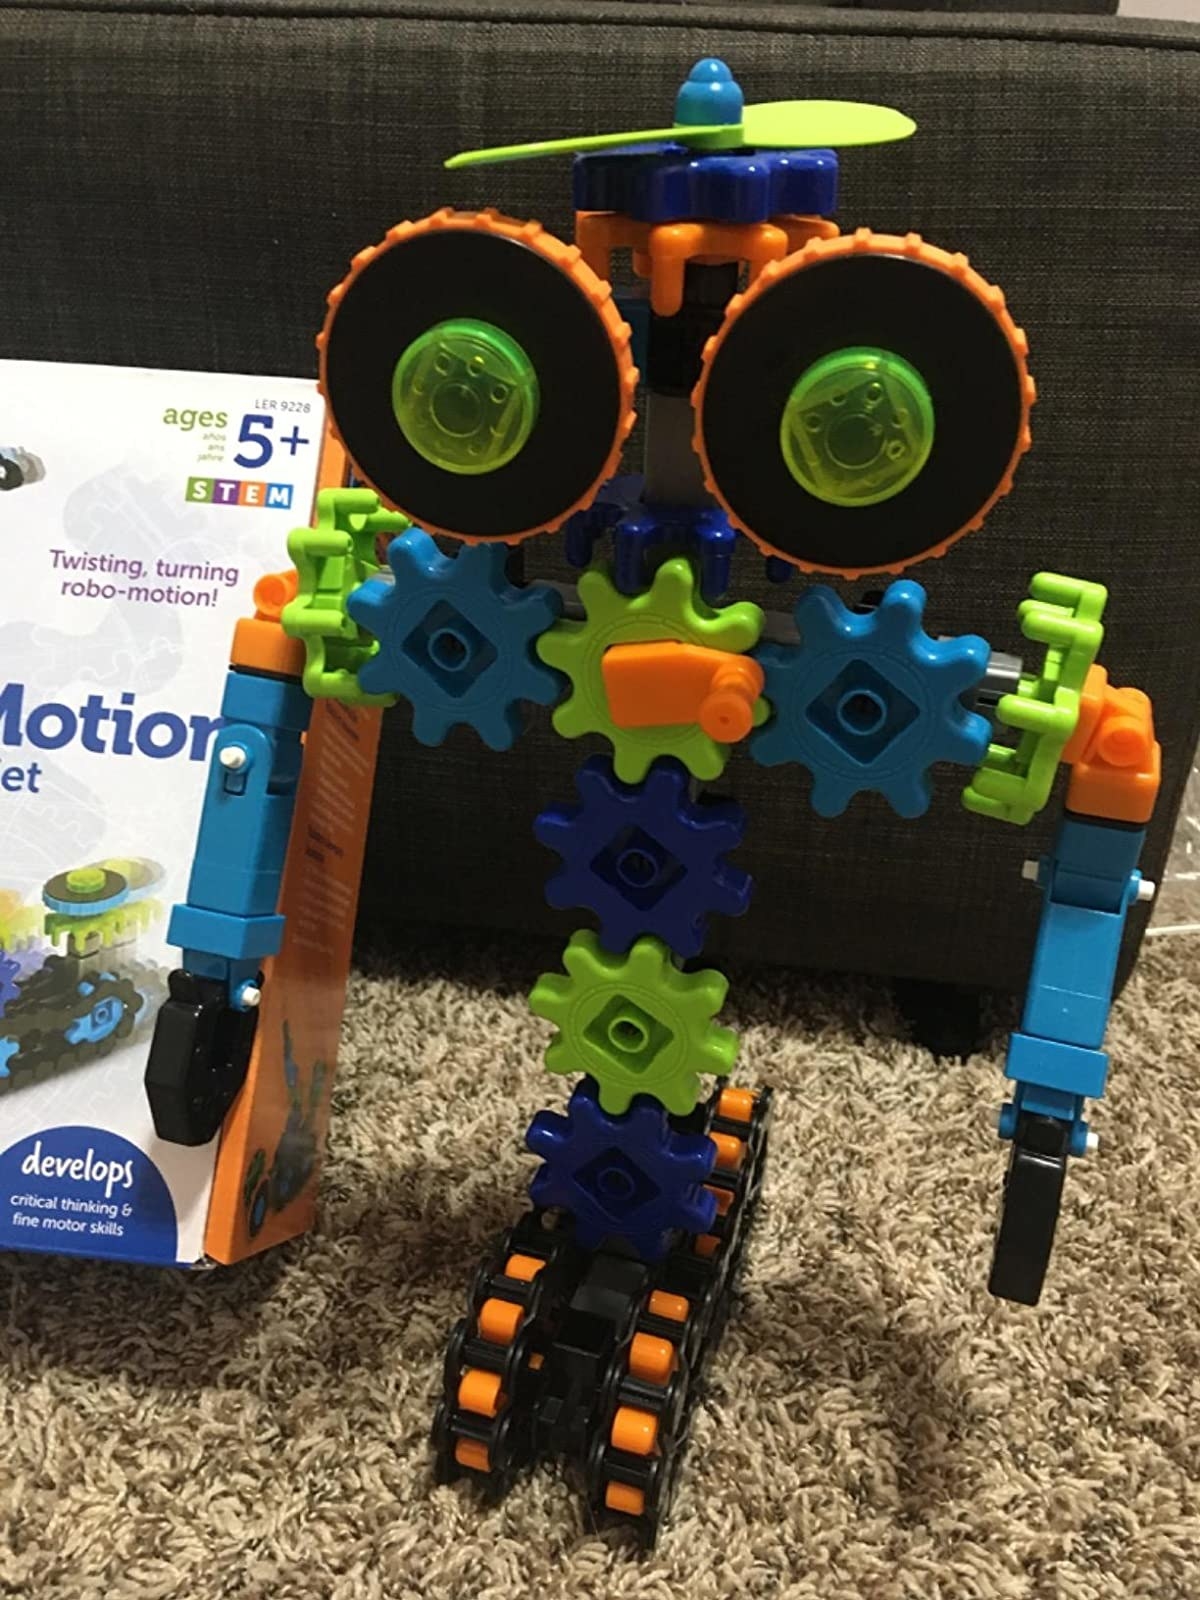 Reviewer&#x27;s image of colorful plastic robot toy and packaging